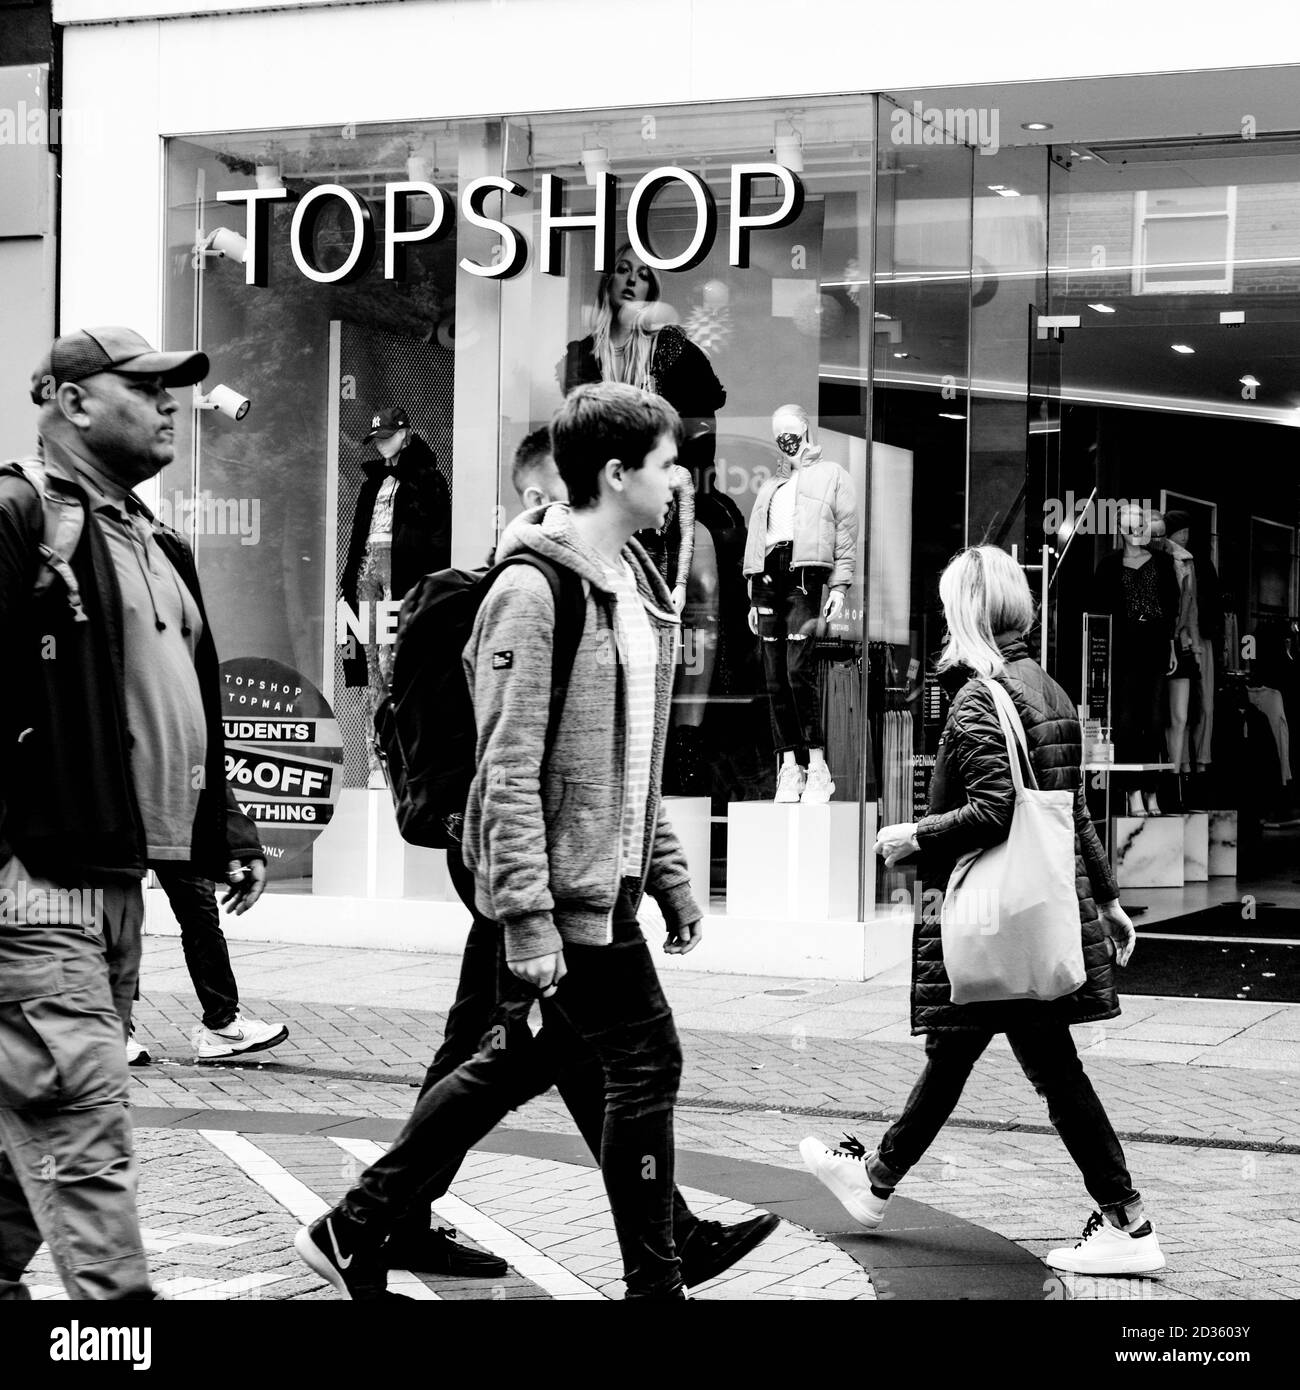 Topshop Black and White Stock Photos & Images - Alamy